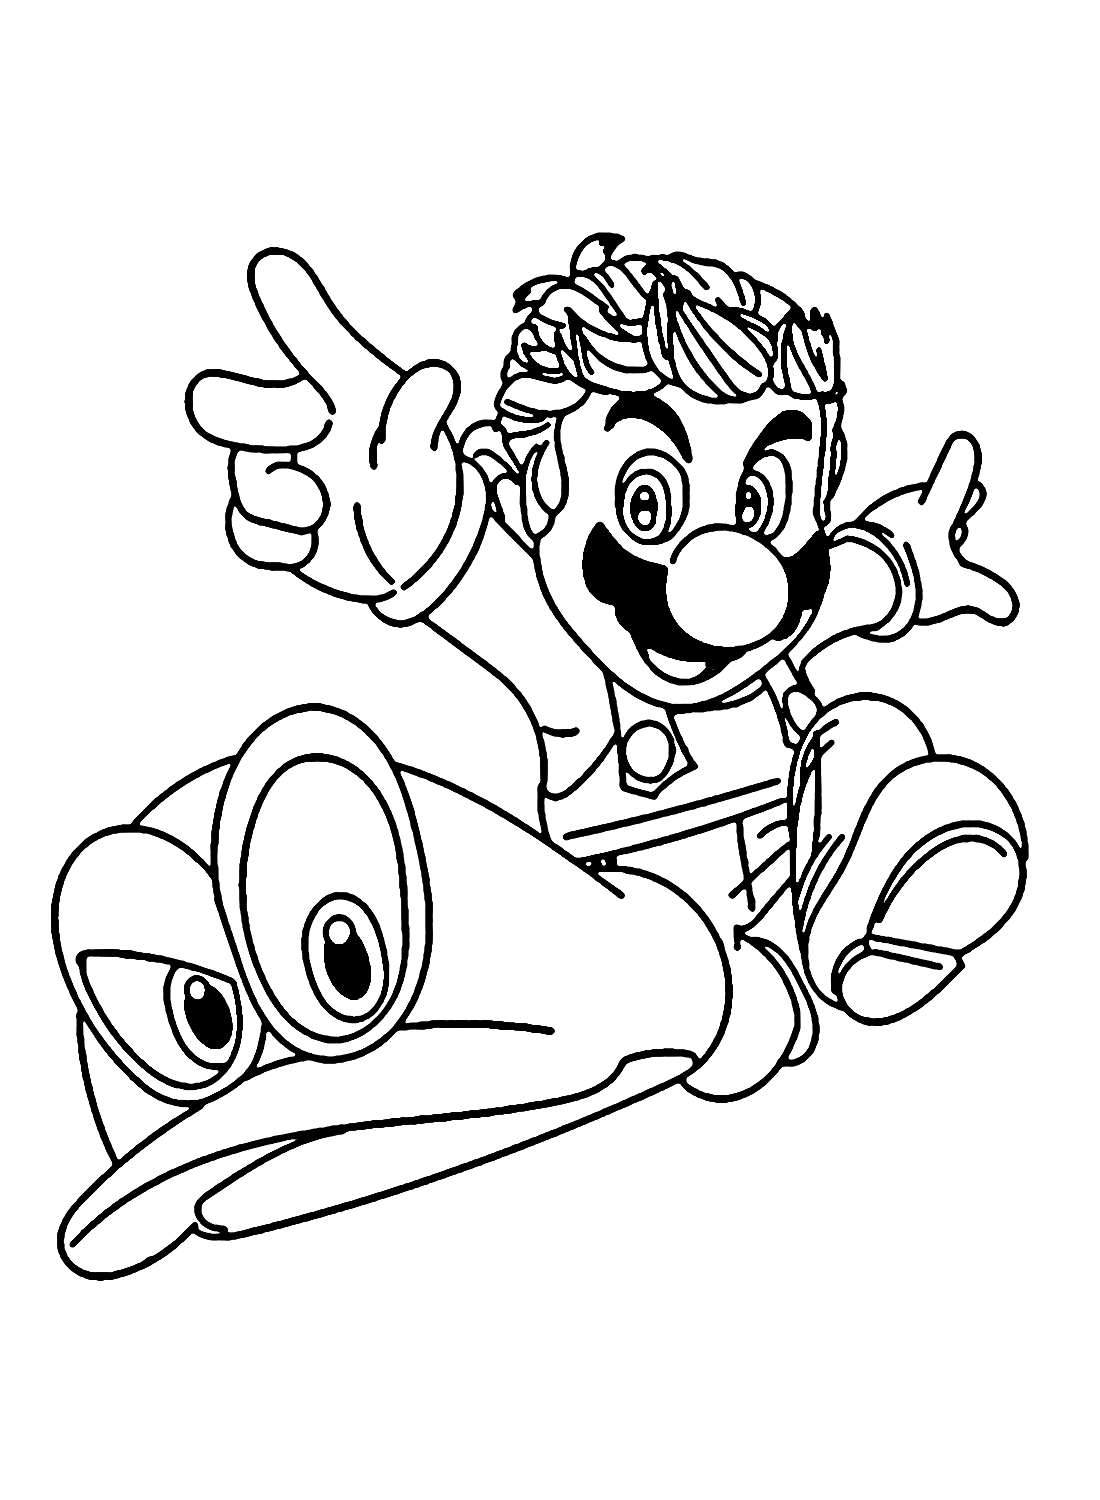 Mario with Cappy Images Coloring Page